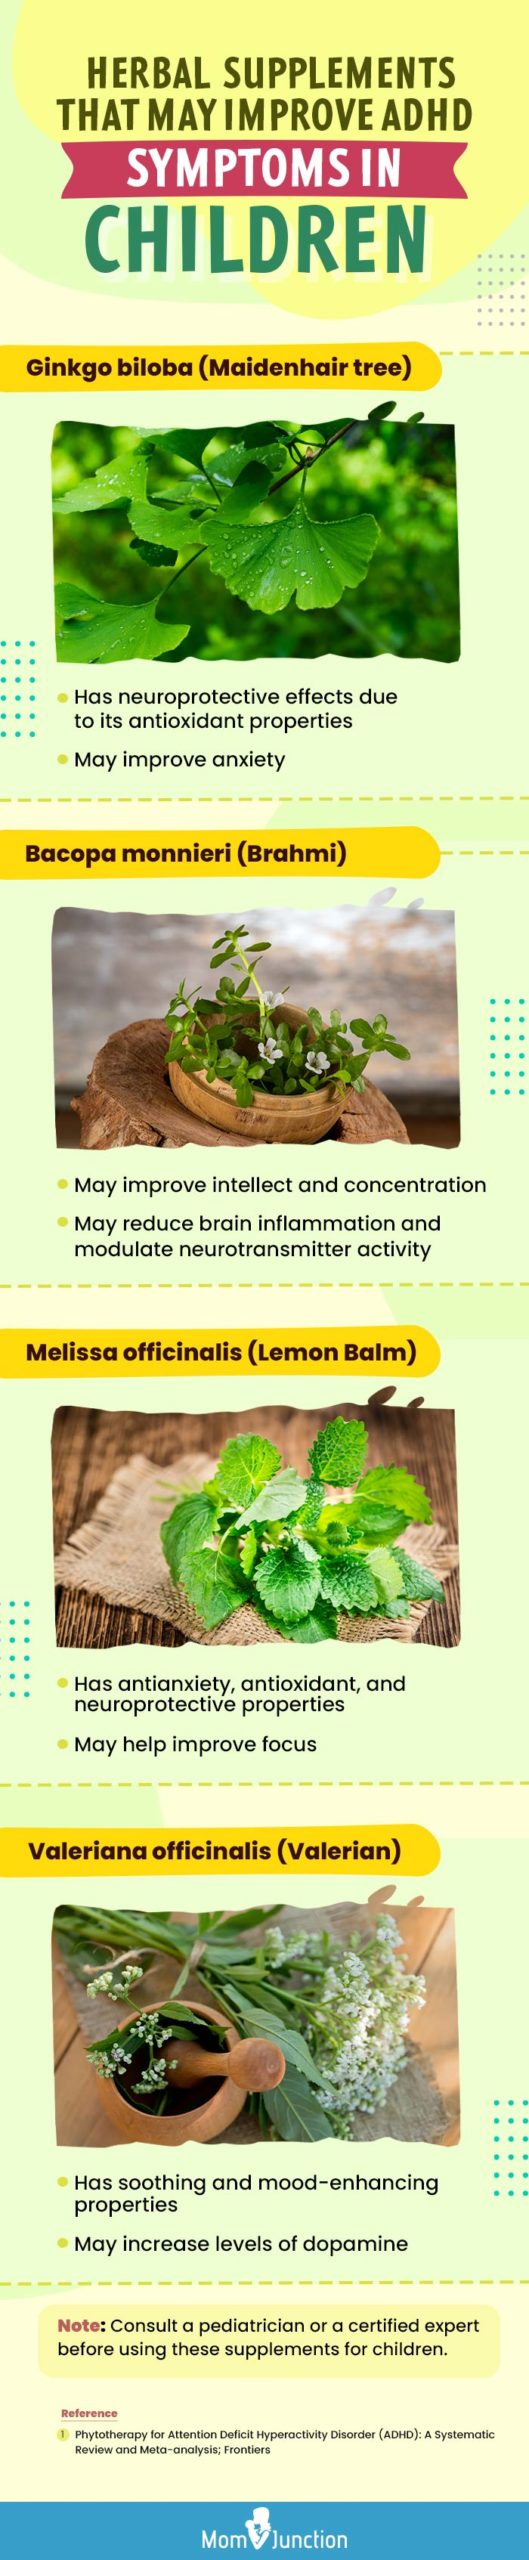 herbal supplements that may improve adhd symptoms in children (infographic)